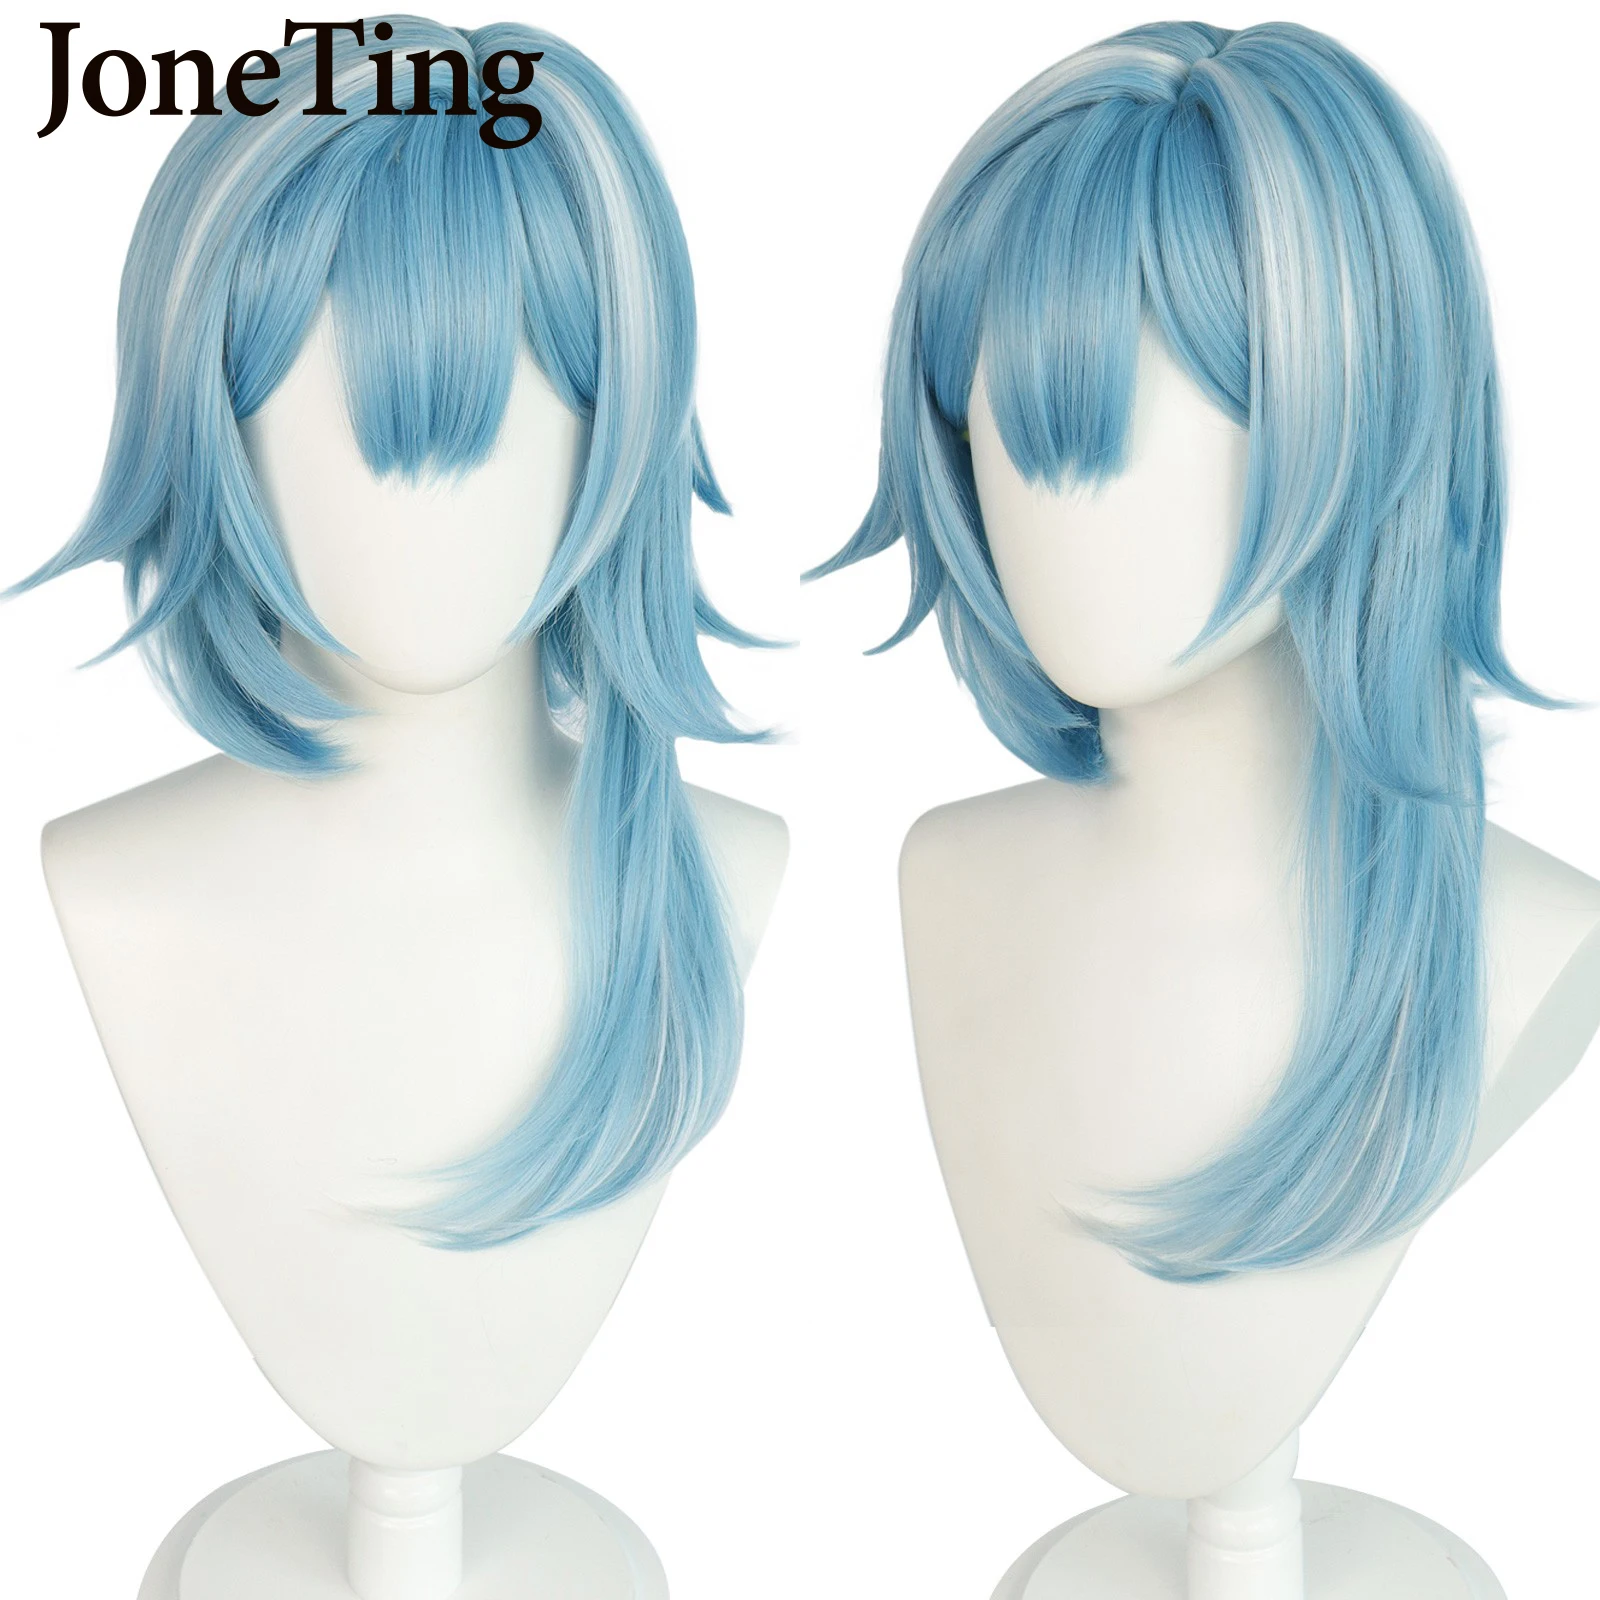 JT Synthetic Eula Cosplay Wigs Game Genshin Impact Long Light Blue Wavy Hair with Bangs Heat Resistant Fiber Wig Machine Made l email wig genshin impact jean cosplay wigs with ponytail blonde curly wig with bangs heat resistant synthetic hair game cos